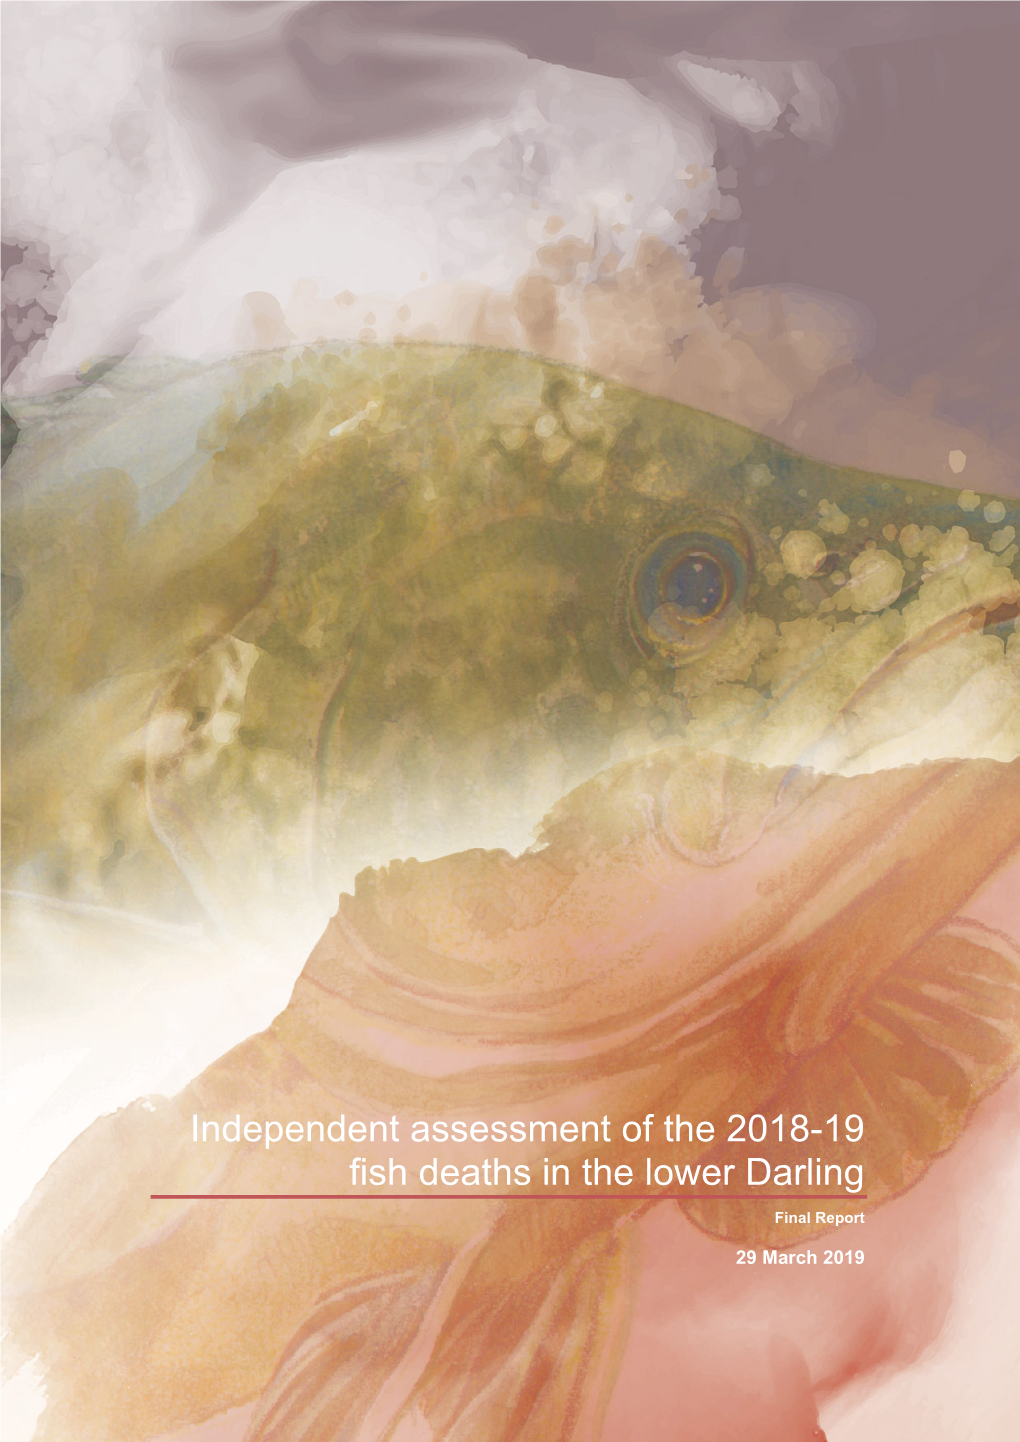 Independent Assessment of the 2018-19 Fish Deaths in the Lower Darling